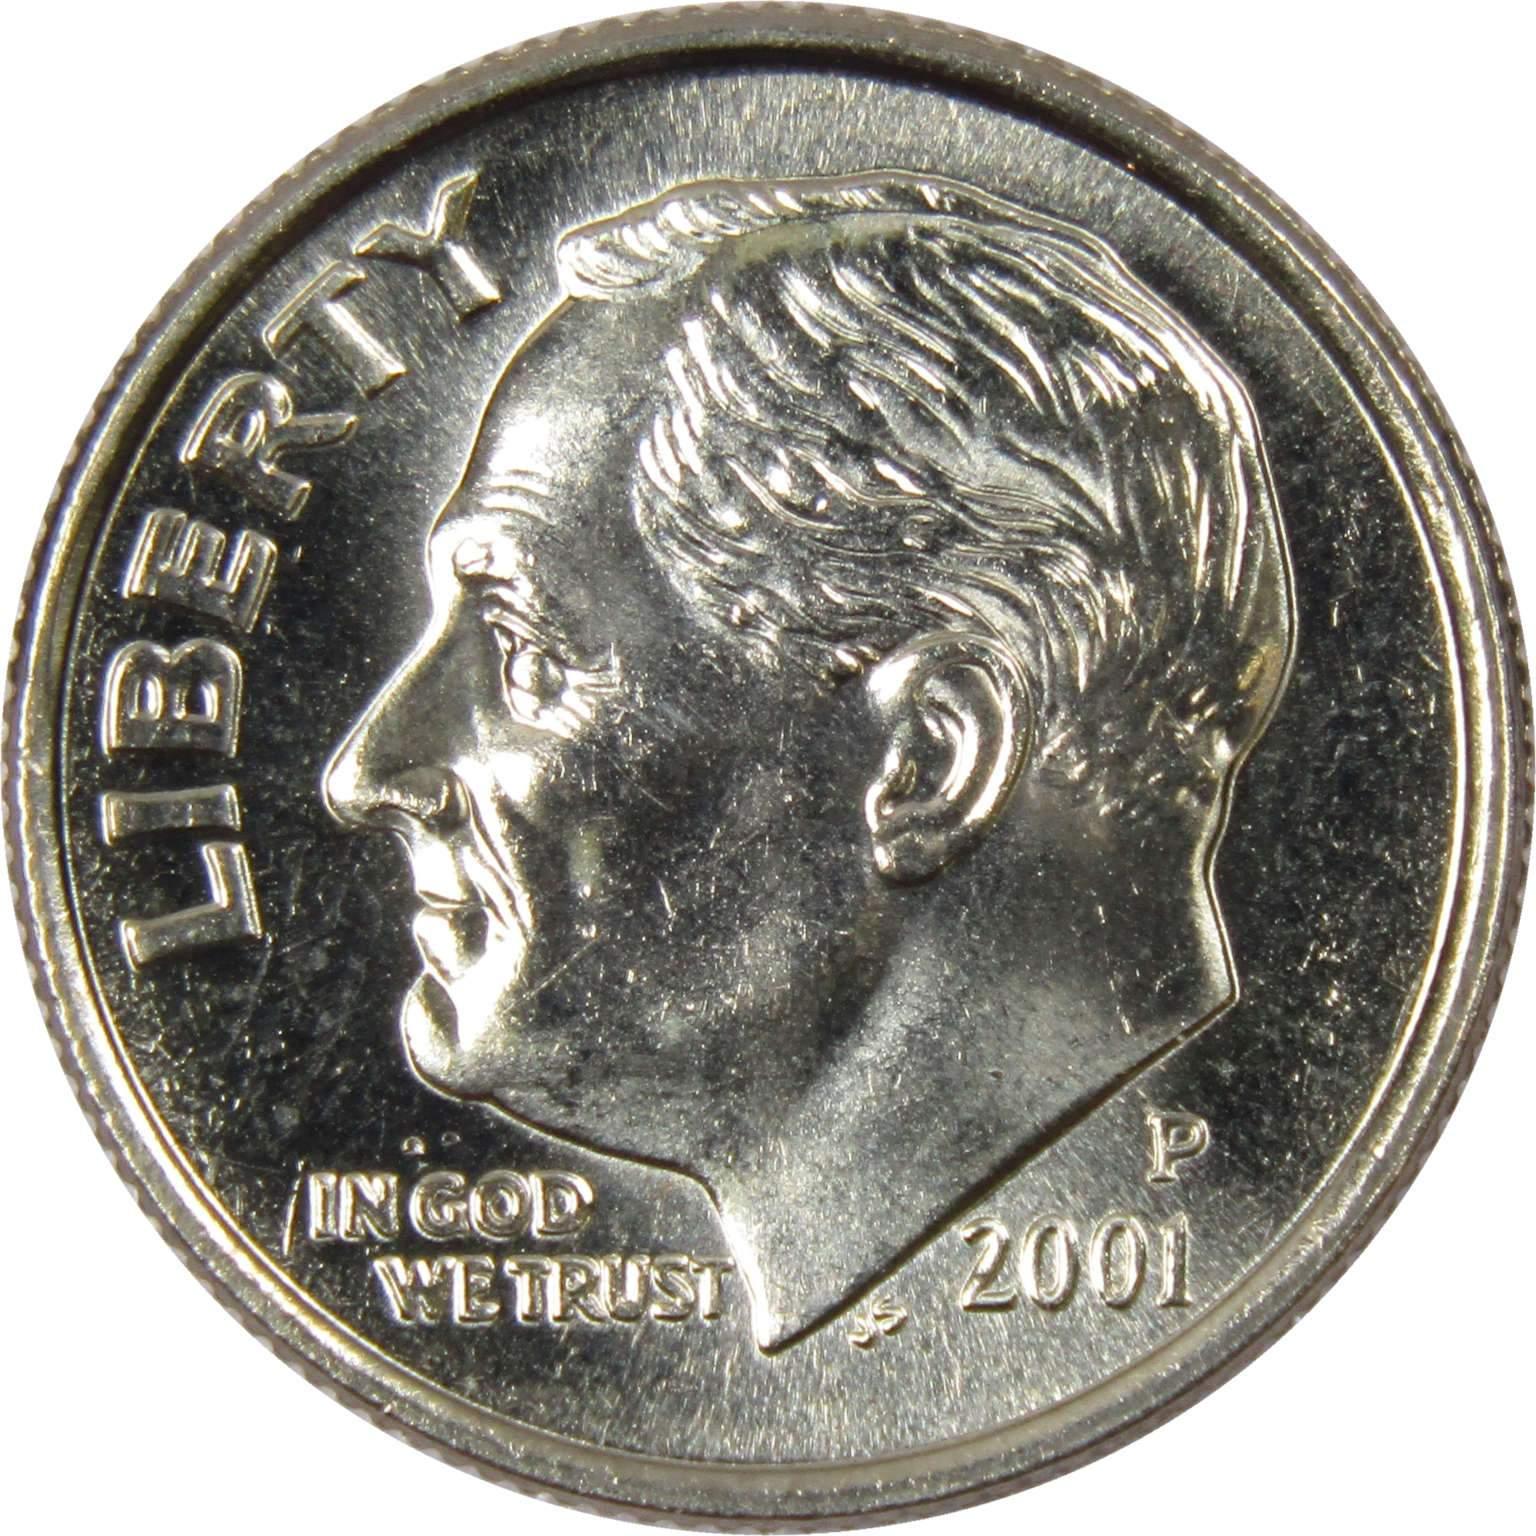 2001 P Roosevelt Dime BU Uncirculated Mint State 10c US Coin Collectible